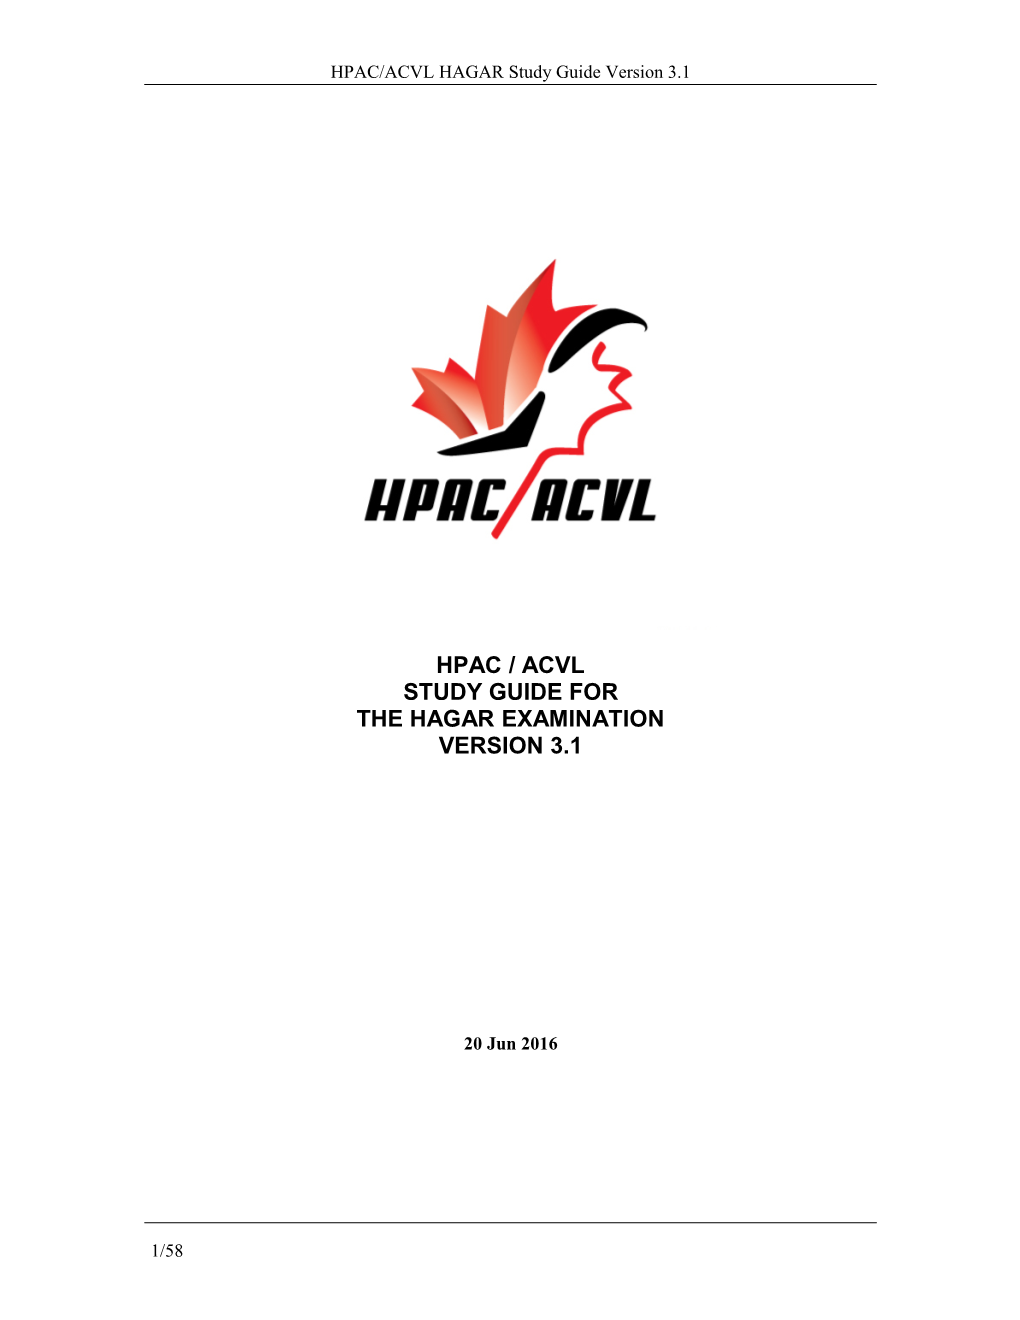 Hpac / Acvl Study Guide for the Hagar Examination Version 3.1